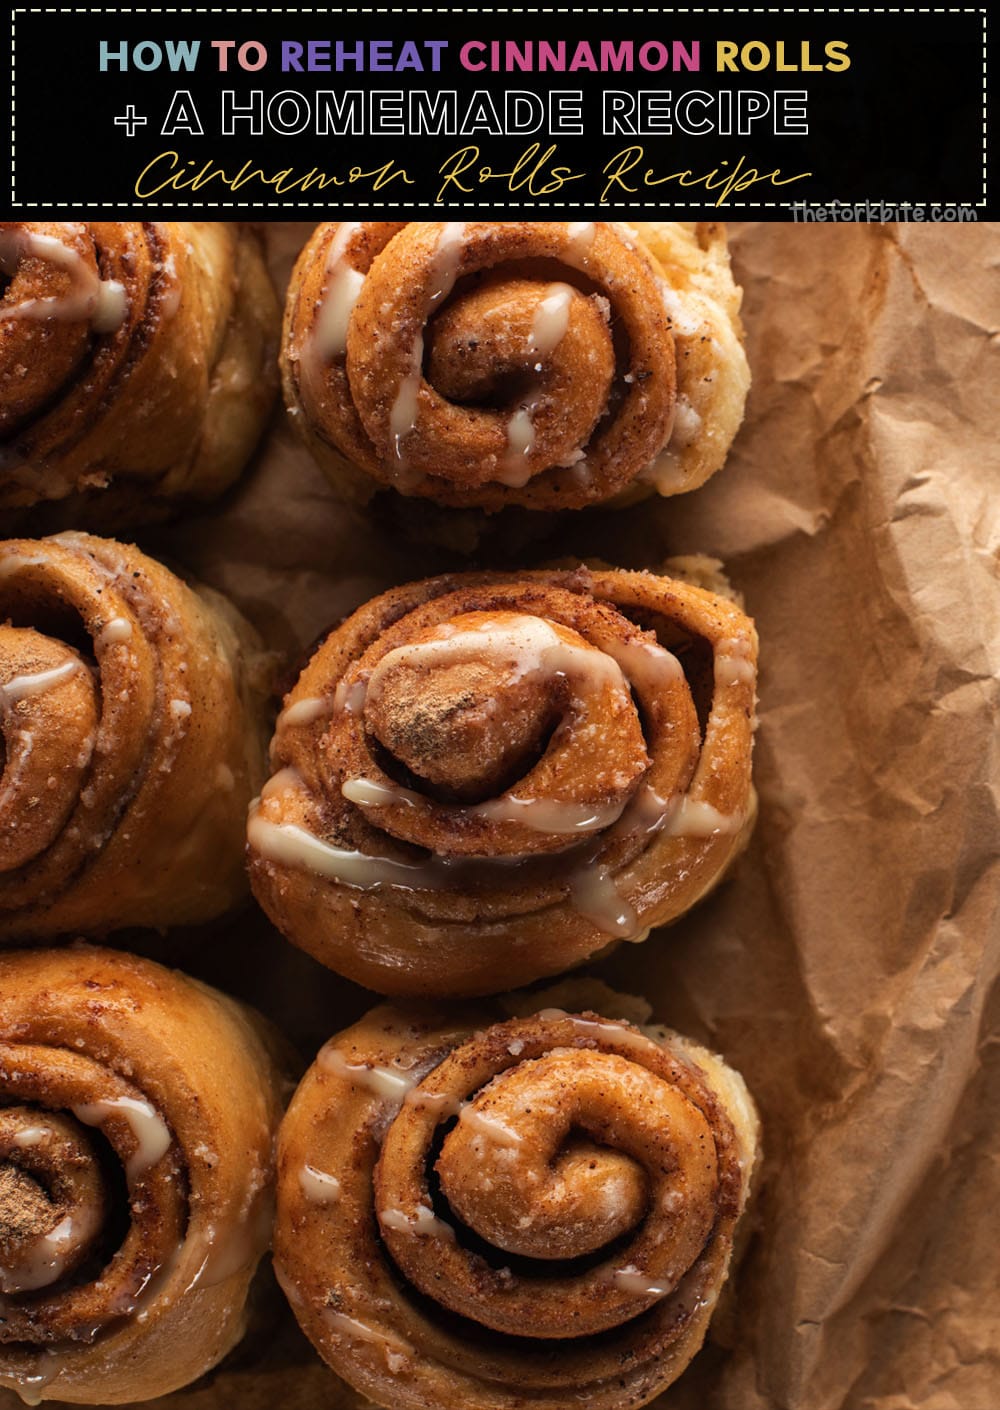 Did you know that you can store cinnamon rolls at room temperature for as long as 3 days without them drying out?